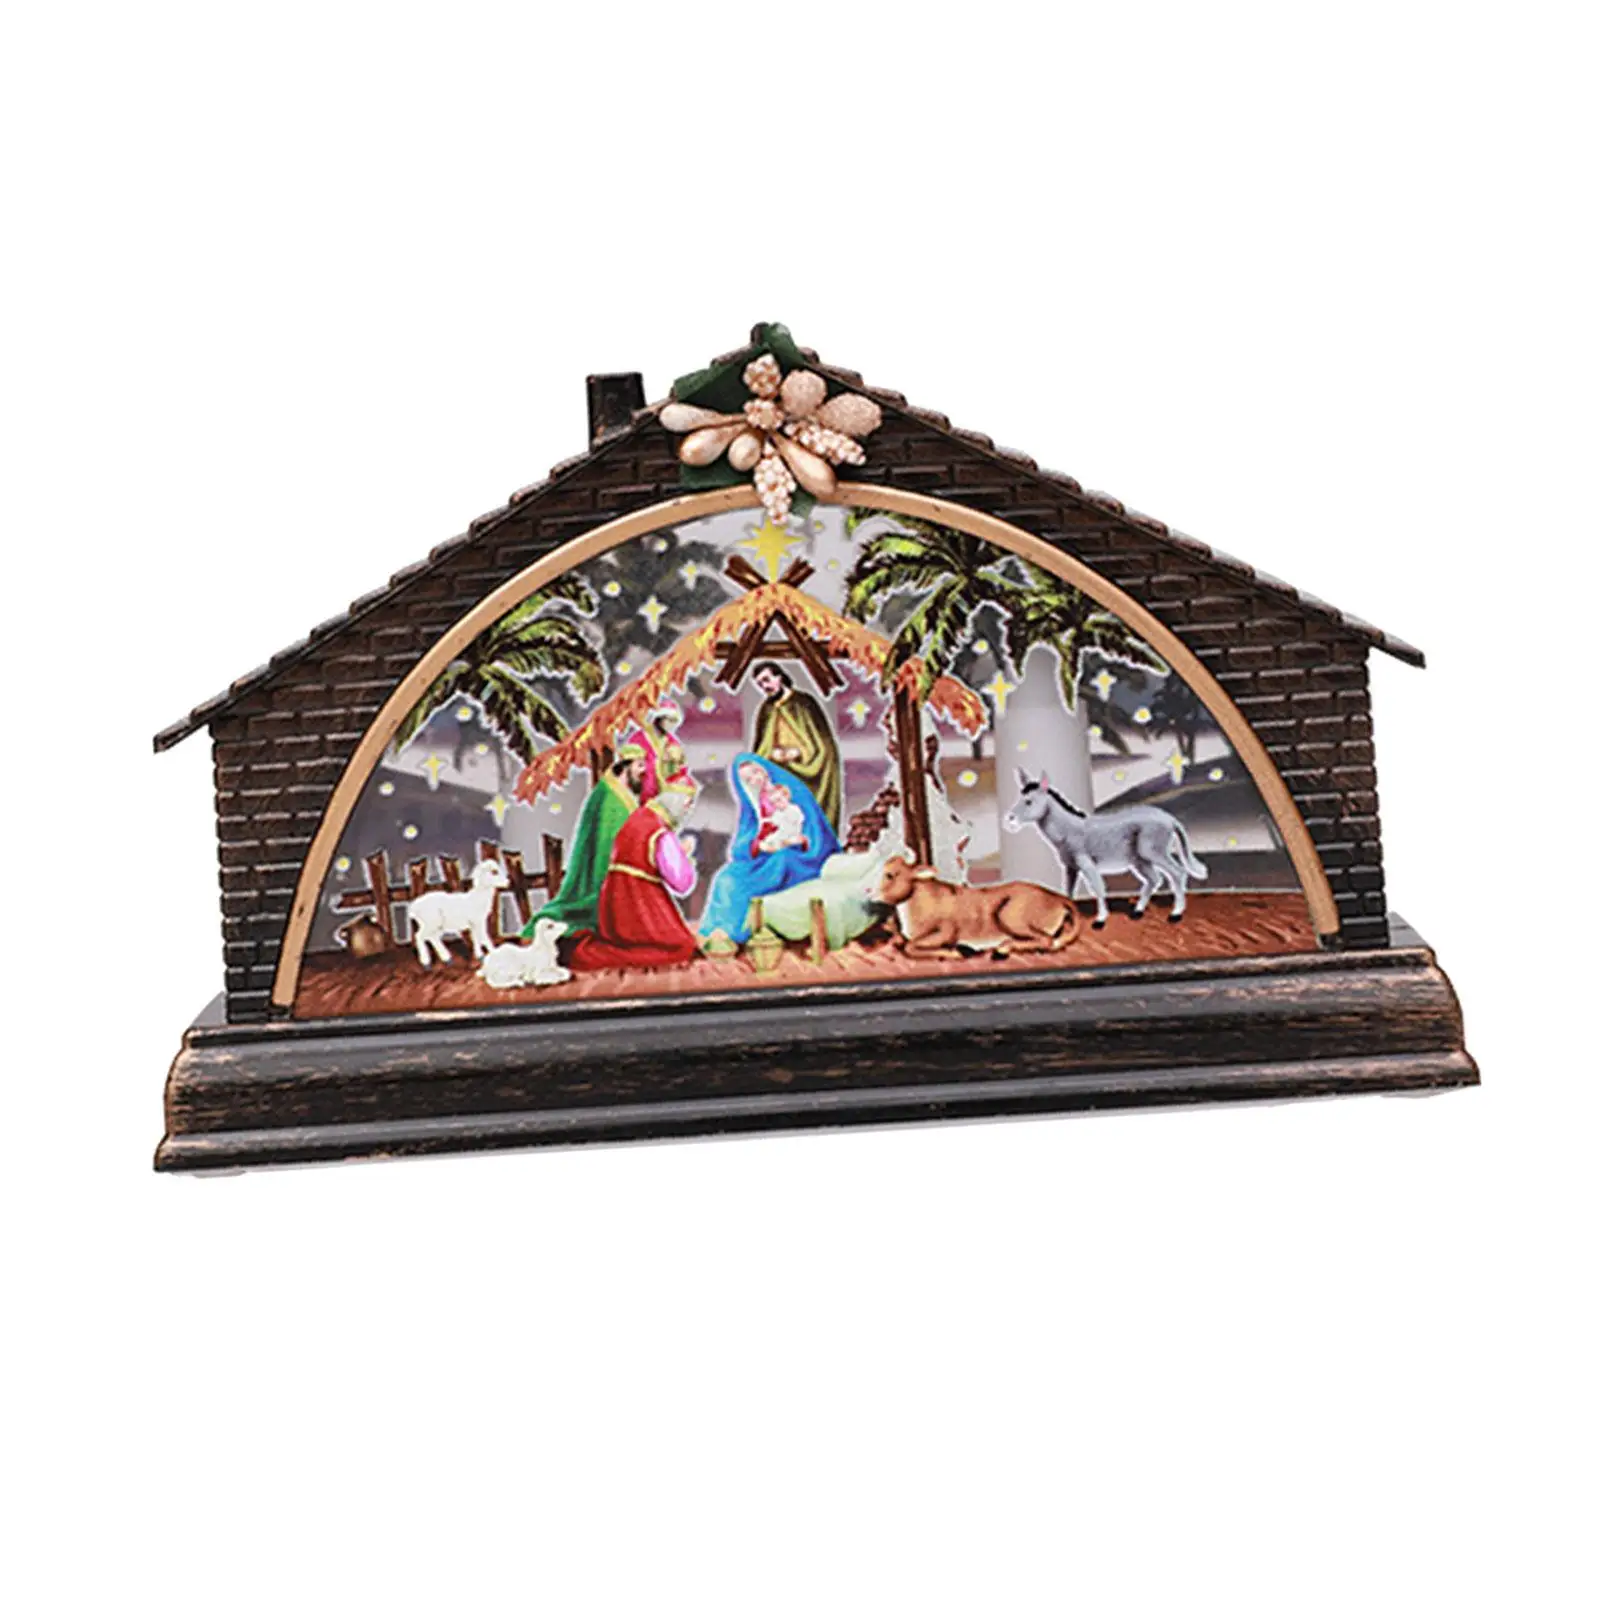 Christmas Lantern Night Light House Battery Powered Holy Family Nativity Scene Lamp for Party Home Office Decoration Ornament